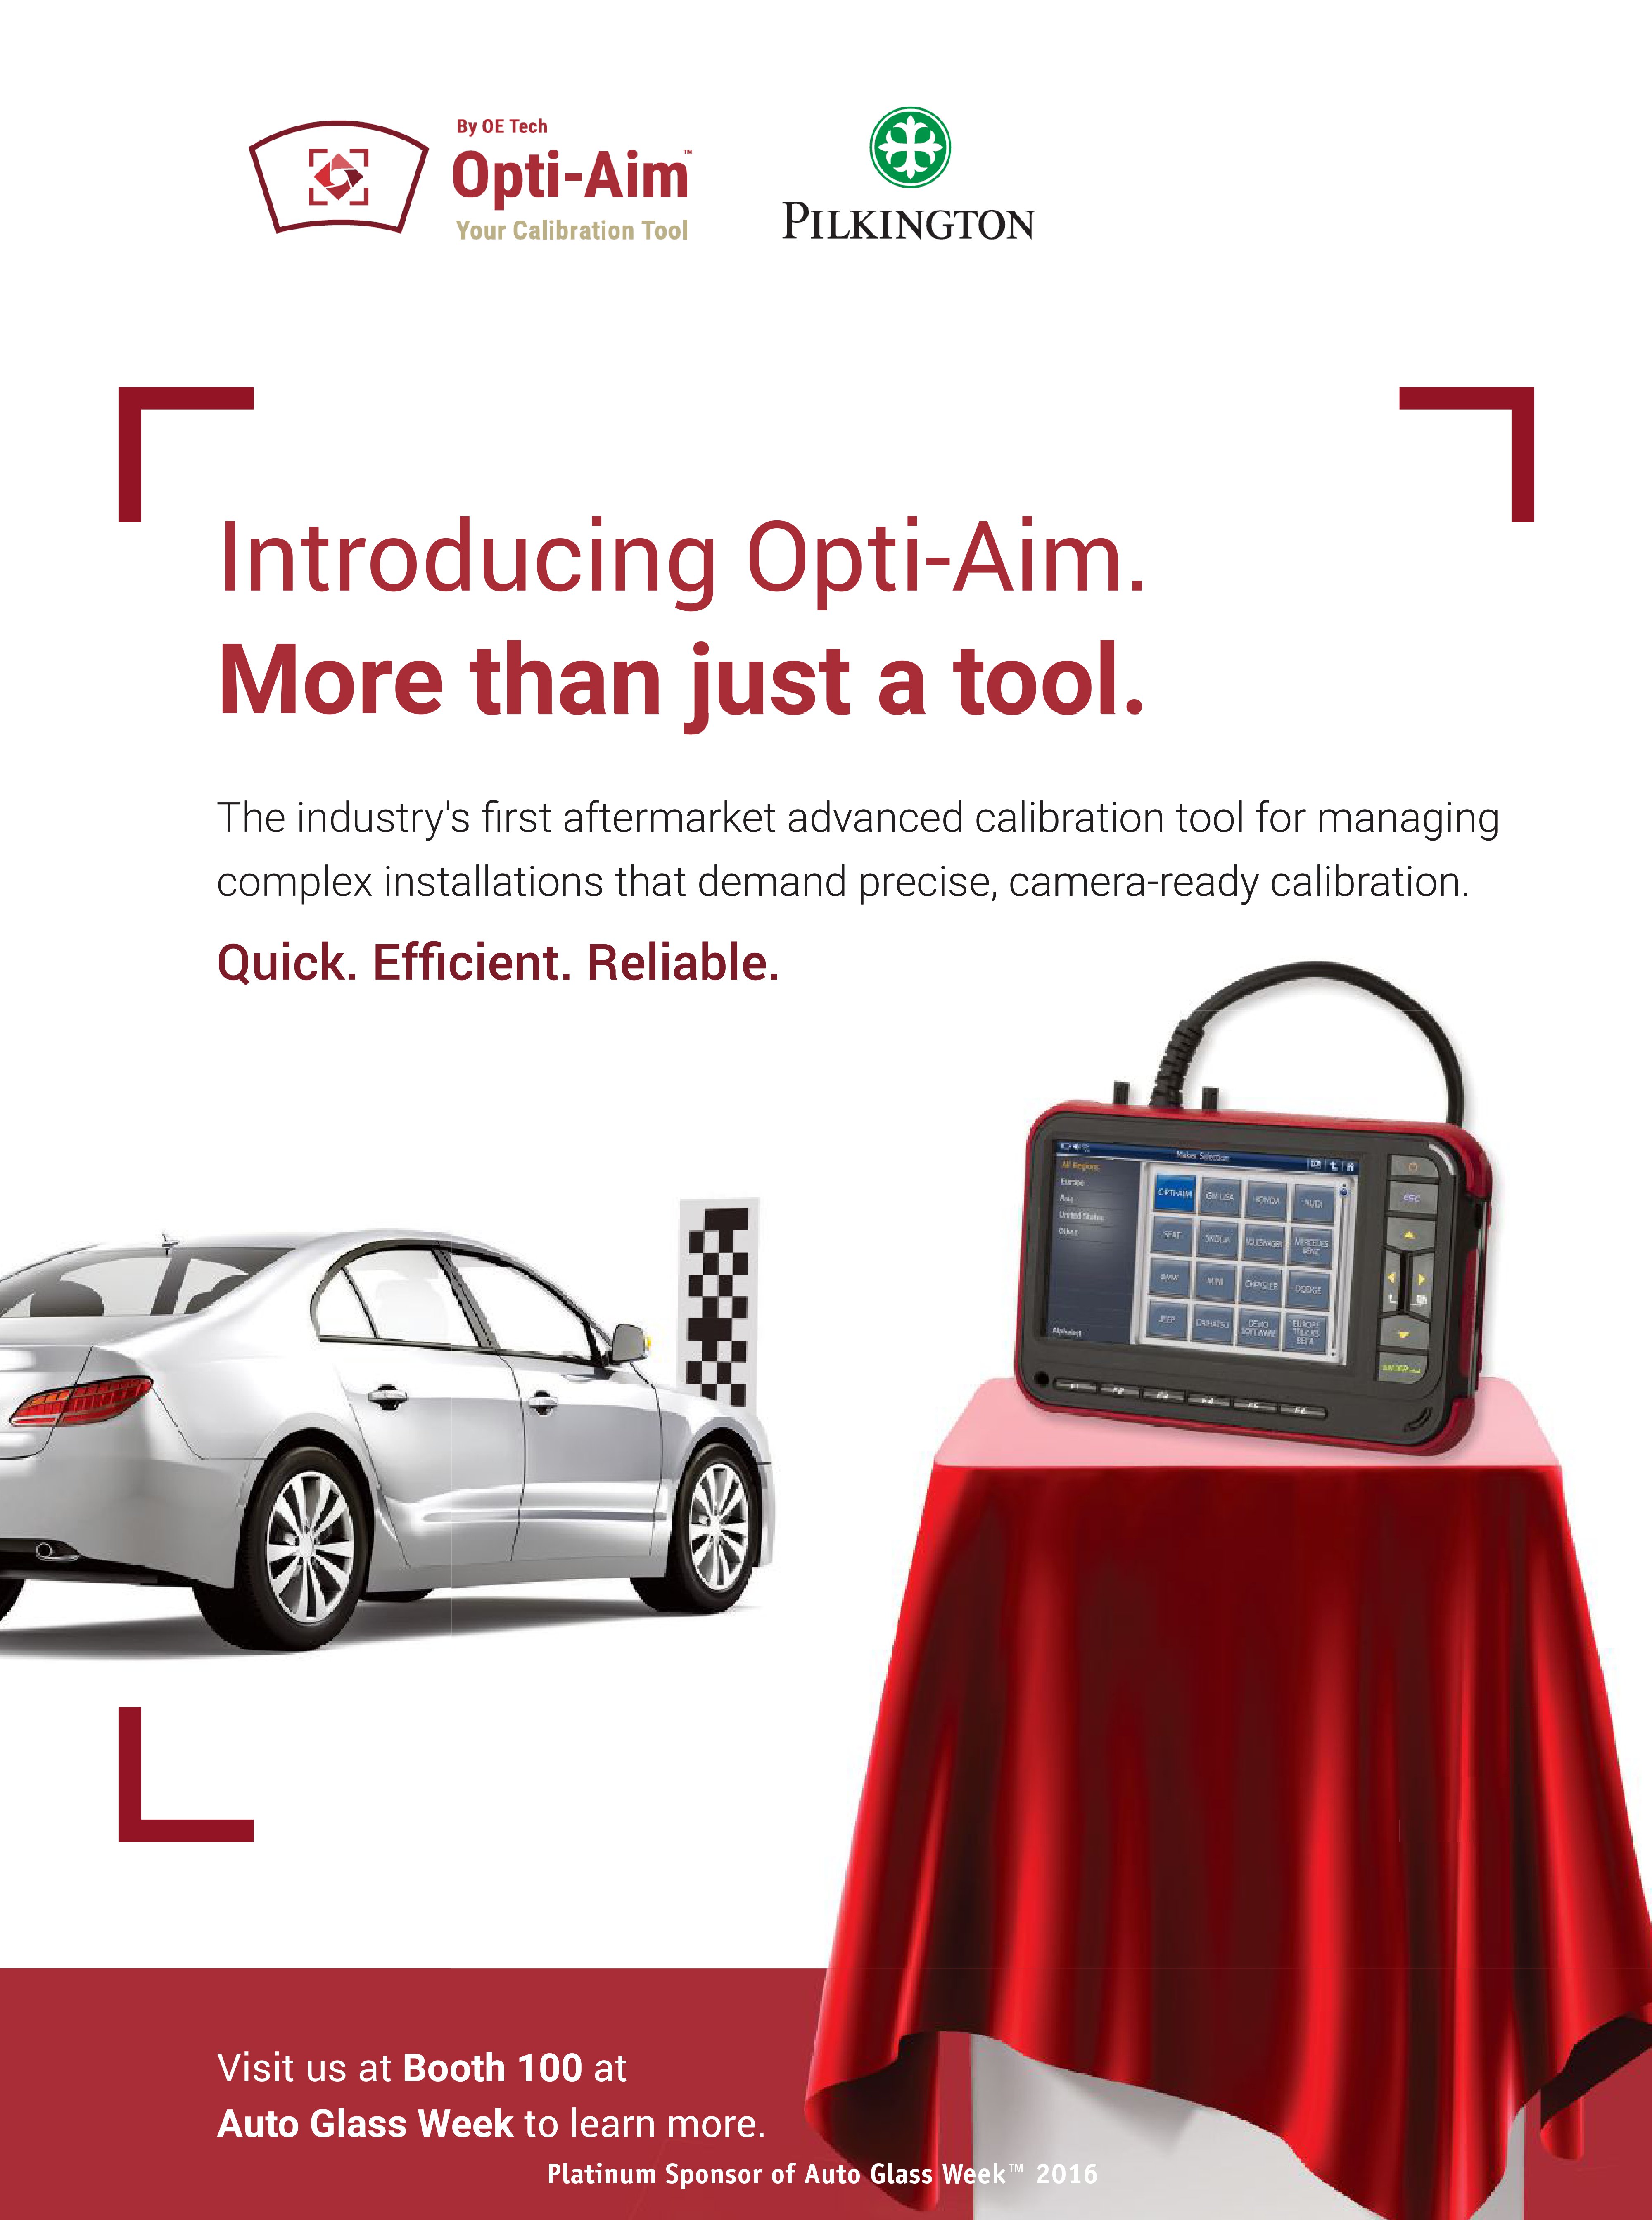 The September-October issue of AGRR displays an ad for the Pilkington OPTI-AIM. (Provided by AGRR)